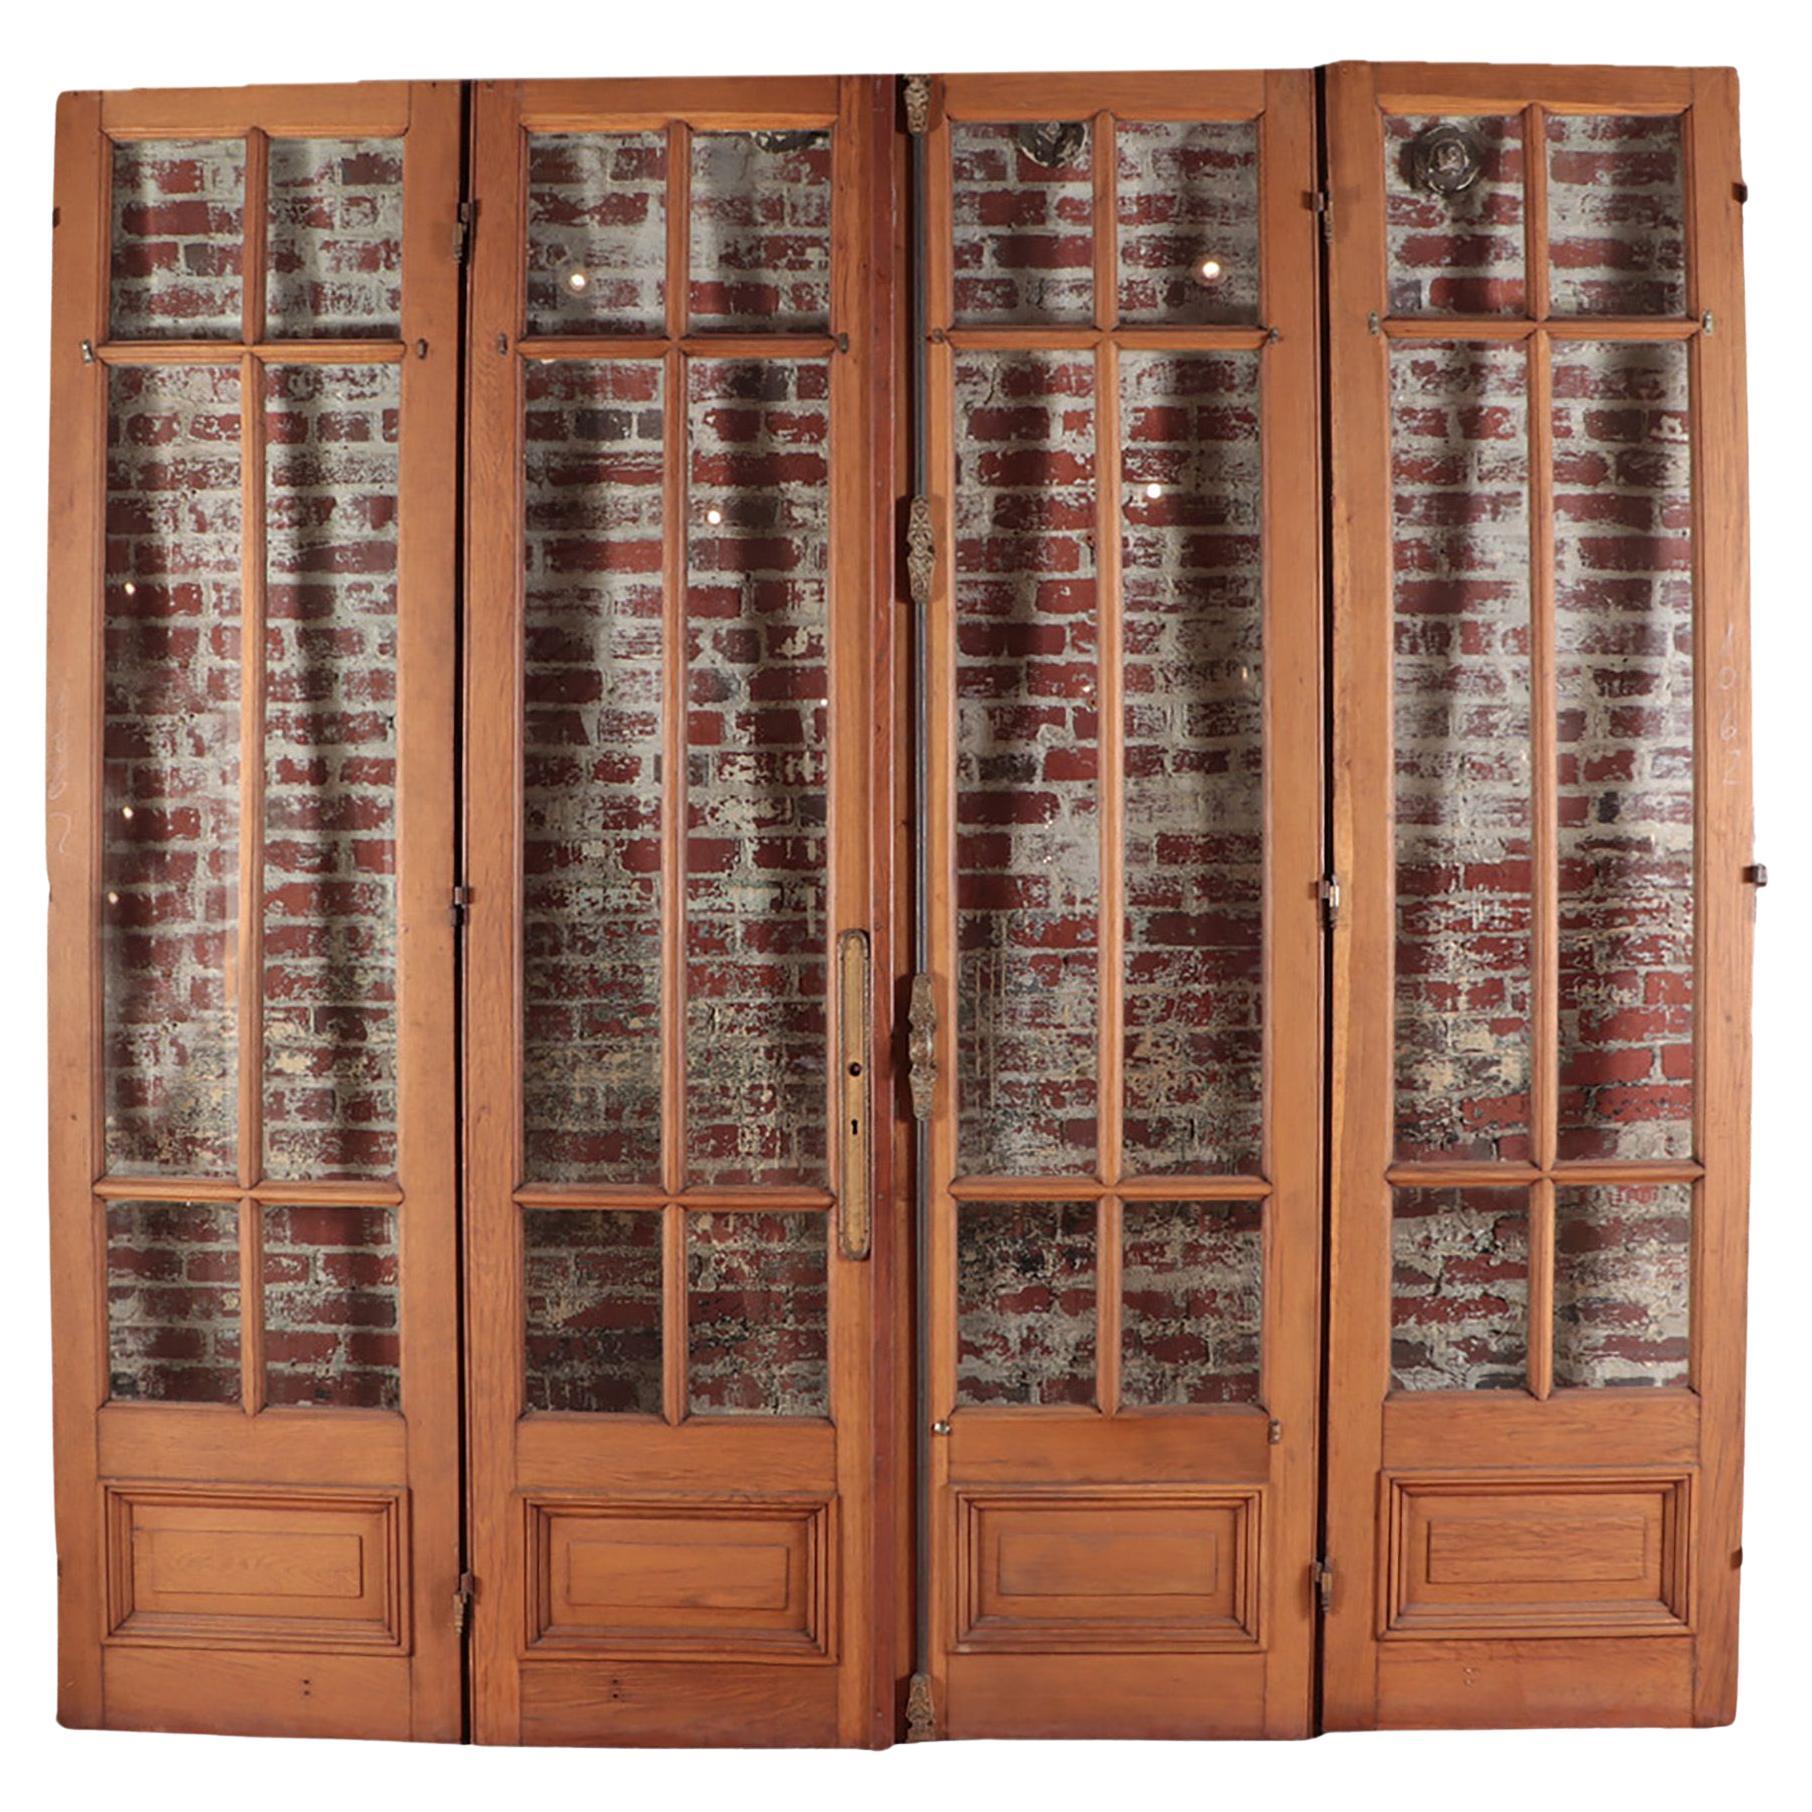 Set of Four Panel Oak Entry Doors with Beveled Glass, circa 1900